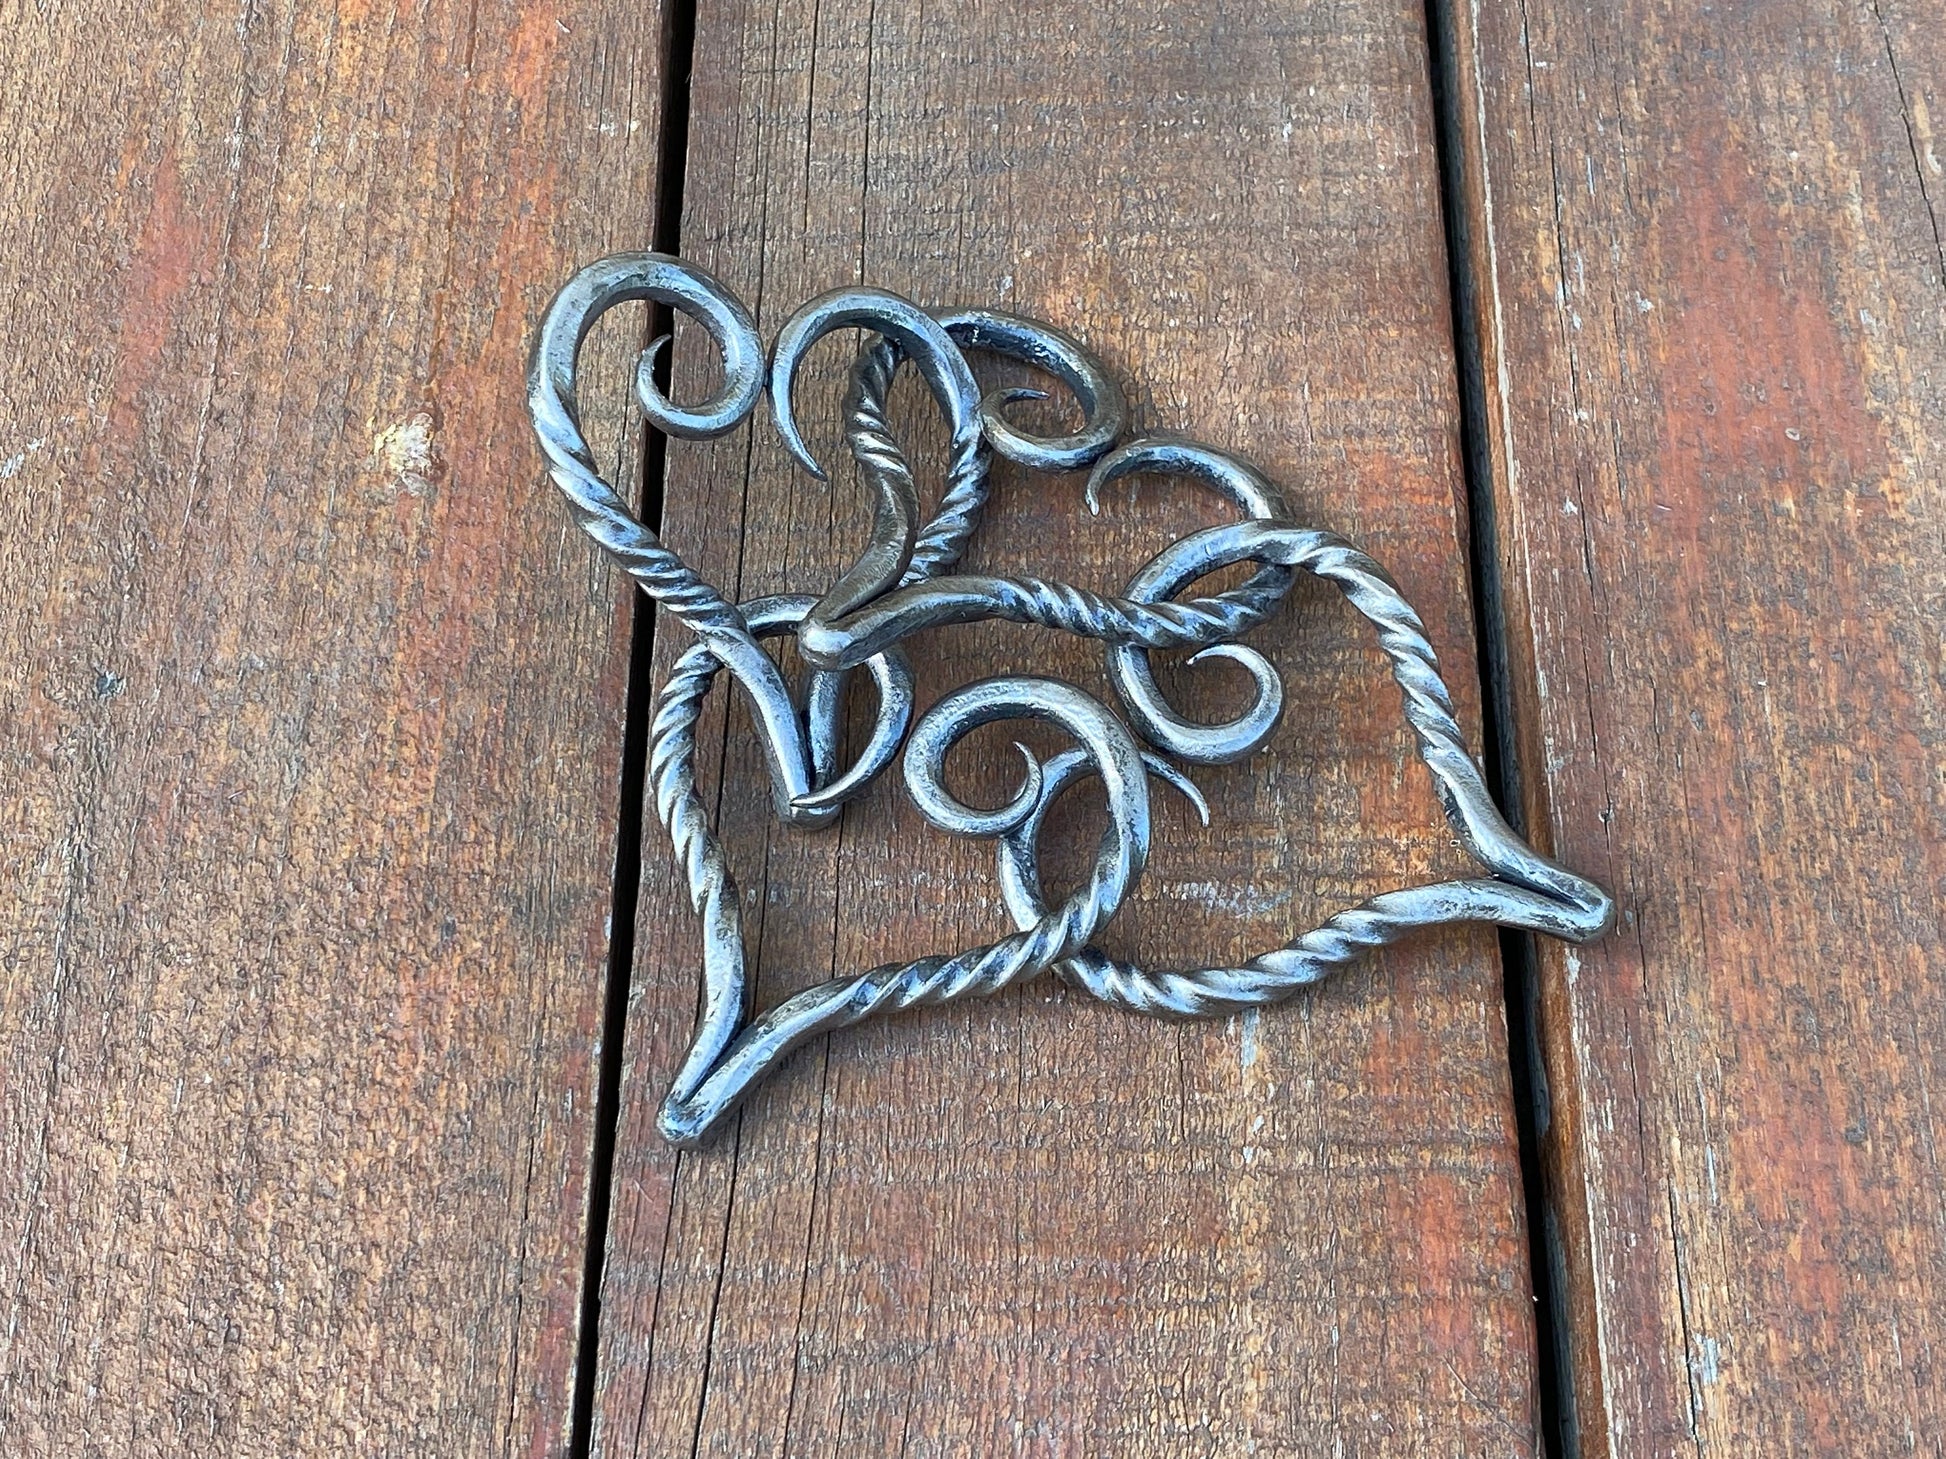 Entwined hearts, anniversary gift, birthday, 6th anniversary, 11th anniversary, personalized gift, heart, iron gift,steel gift,engraved gift